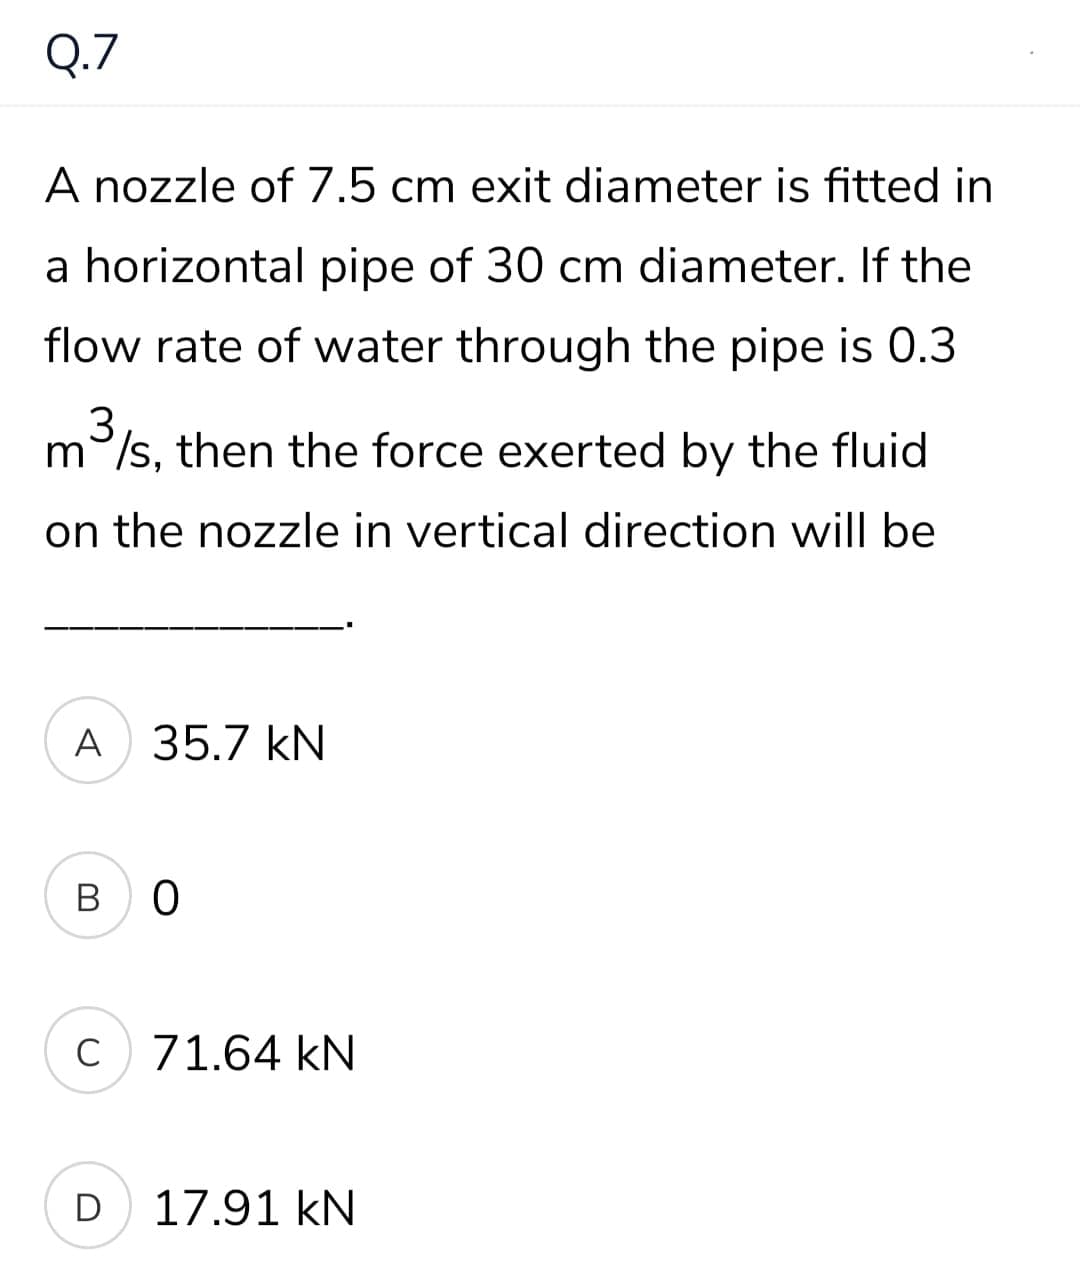 Q.7
A nozzle of 7.5 cm exit diameter is fitted in
a horizontal pipe of 30 cm diameter. If the
flow rate of water through the pipe is 0.3
m/s, then the force exerted by the fluid
on the nozzle in vertical direction will be
A
35.7 kN
в о
C
71.64 kN
D
17.91 kN
